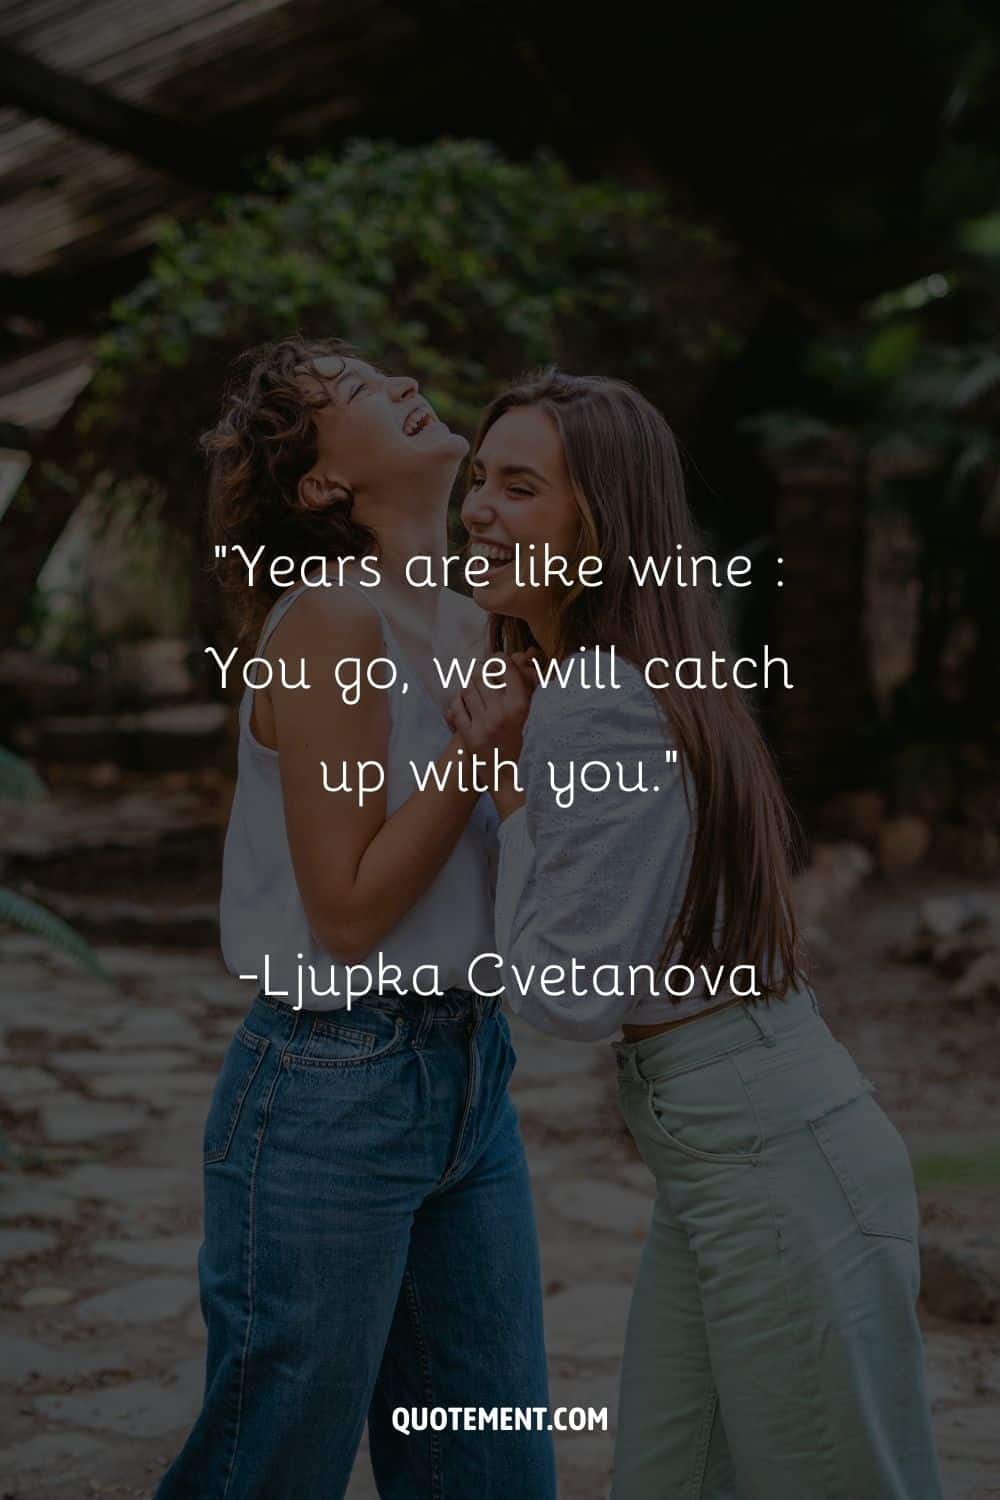 “Years are like wine You go, we will catch up with you.” ― Ljupka Cvetanova, Yet Another New Land